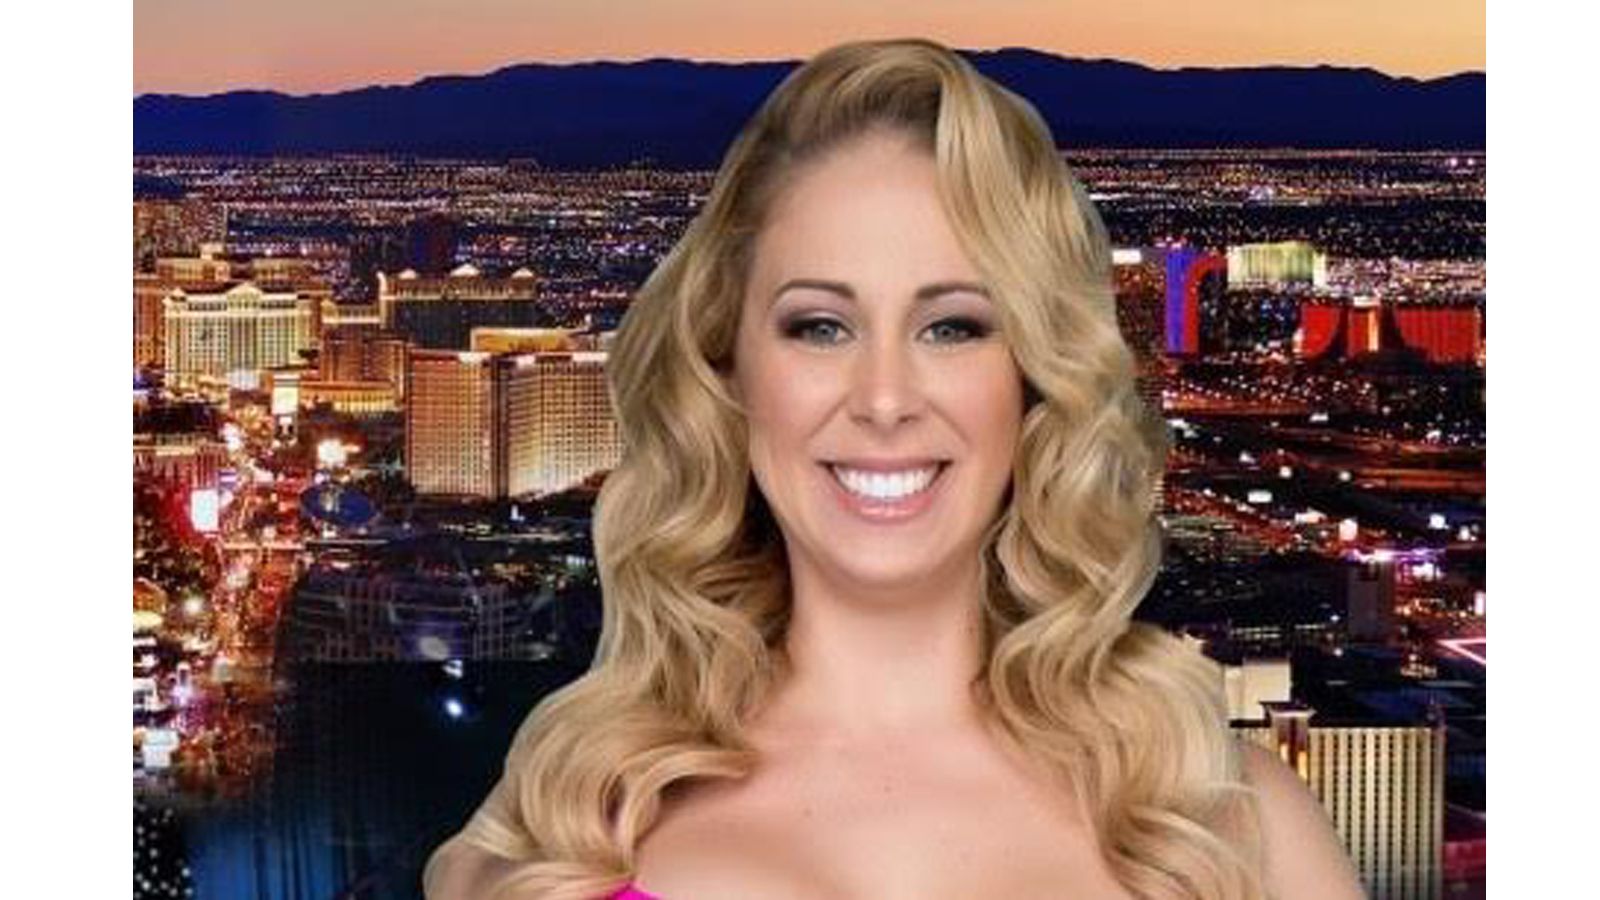 Cherie DeVille Features at Sapphire LV This Weekend